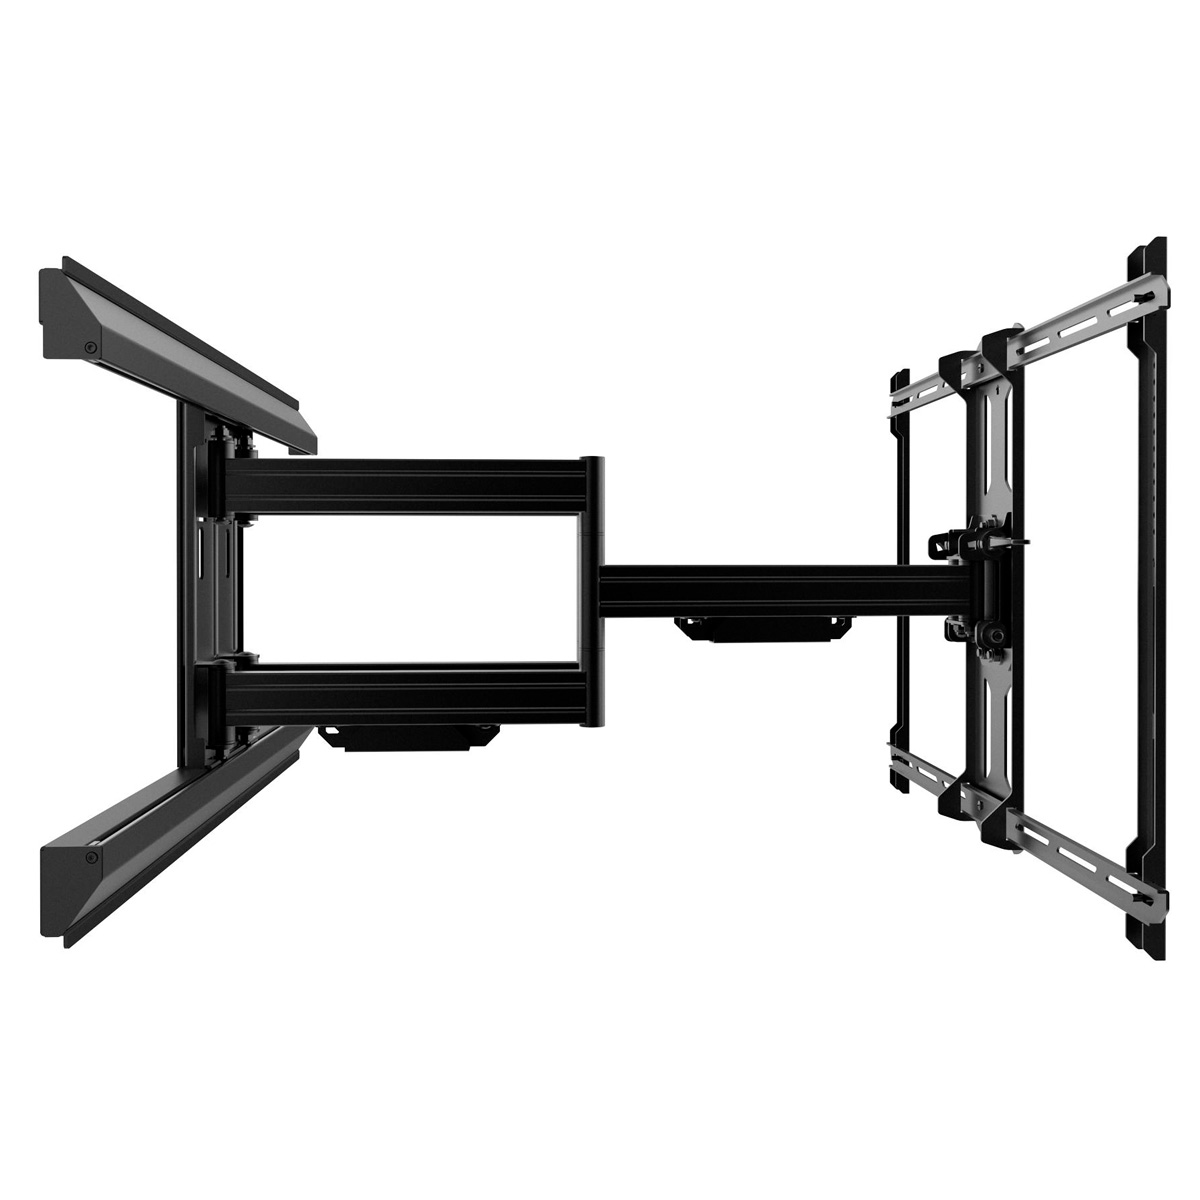 Kanto PMX700 Articulating Full Motion Mount for 42" - 100" TV - image 2 of 8